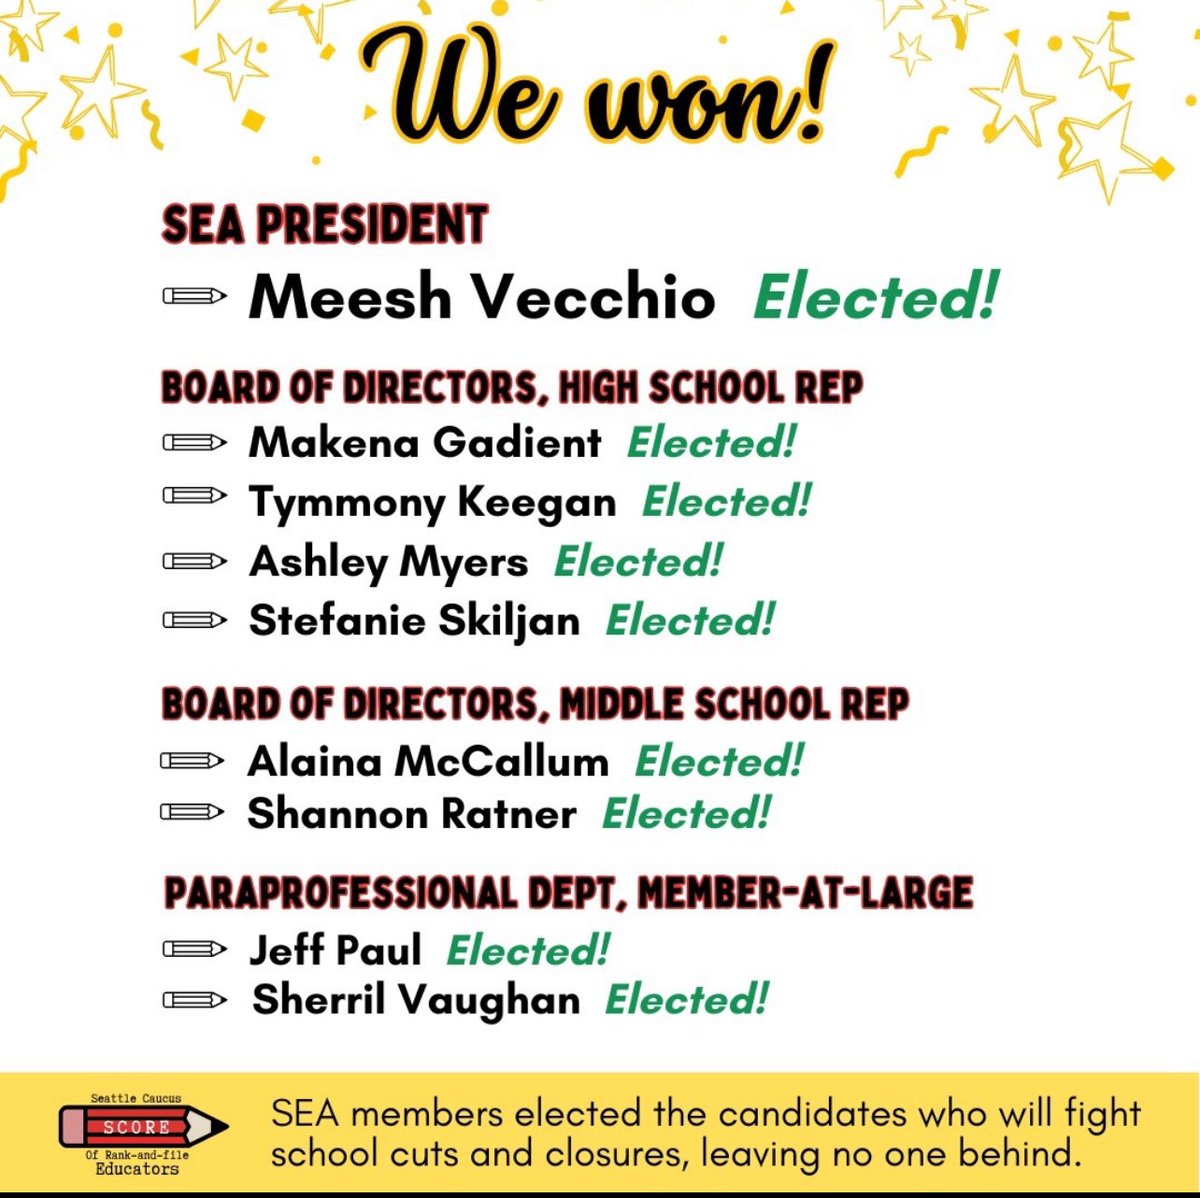 🔥🔥🔥 Our social justice educator union caucus @seattlecore206 won the @SeattleEdAssoc union election!!!!! @meeshforseapresident is now the president & and the caucus has a majority on the board! I’ve been working towards a victory like this for a very long time!! Inspiring✊🏾